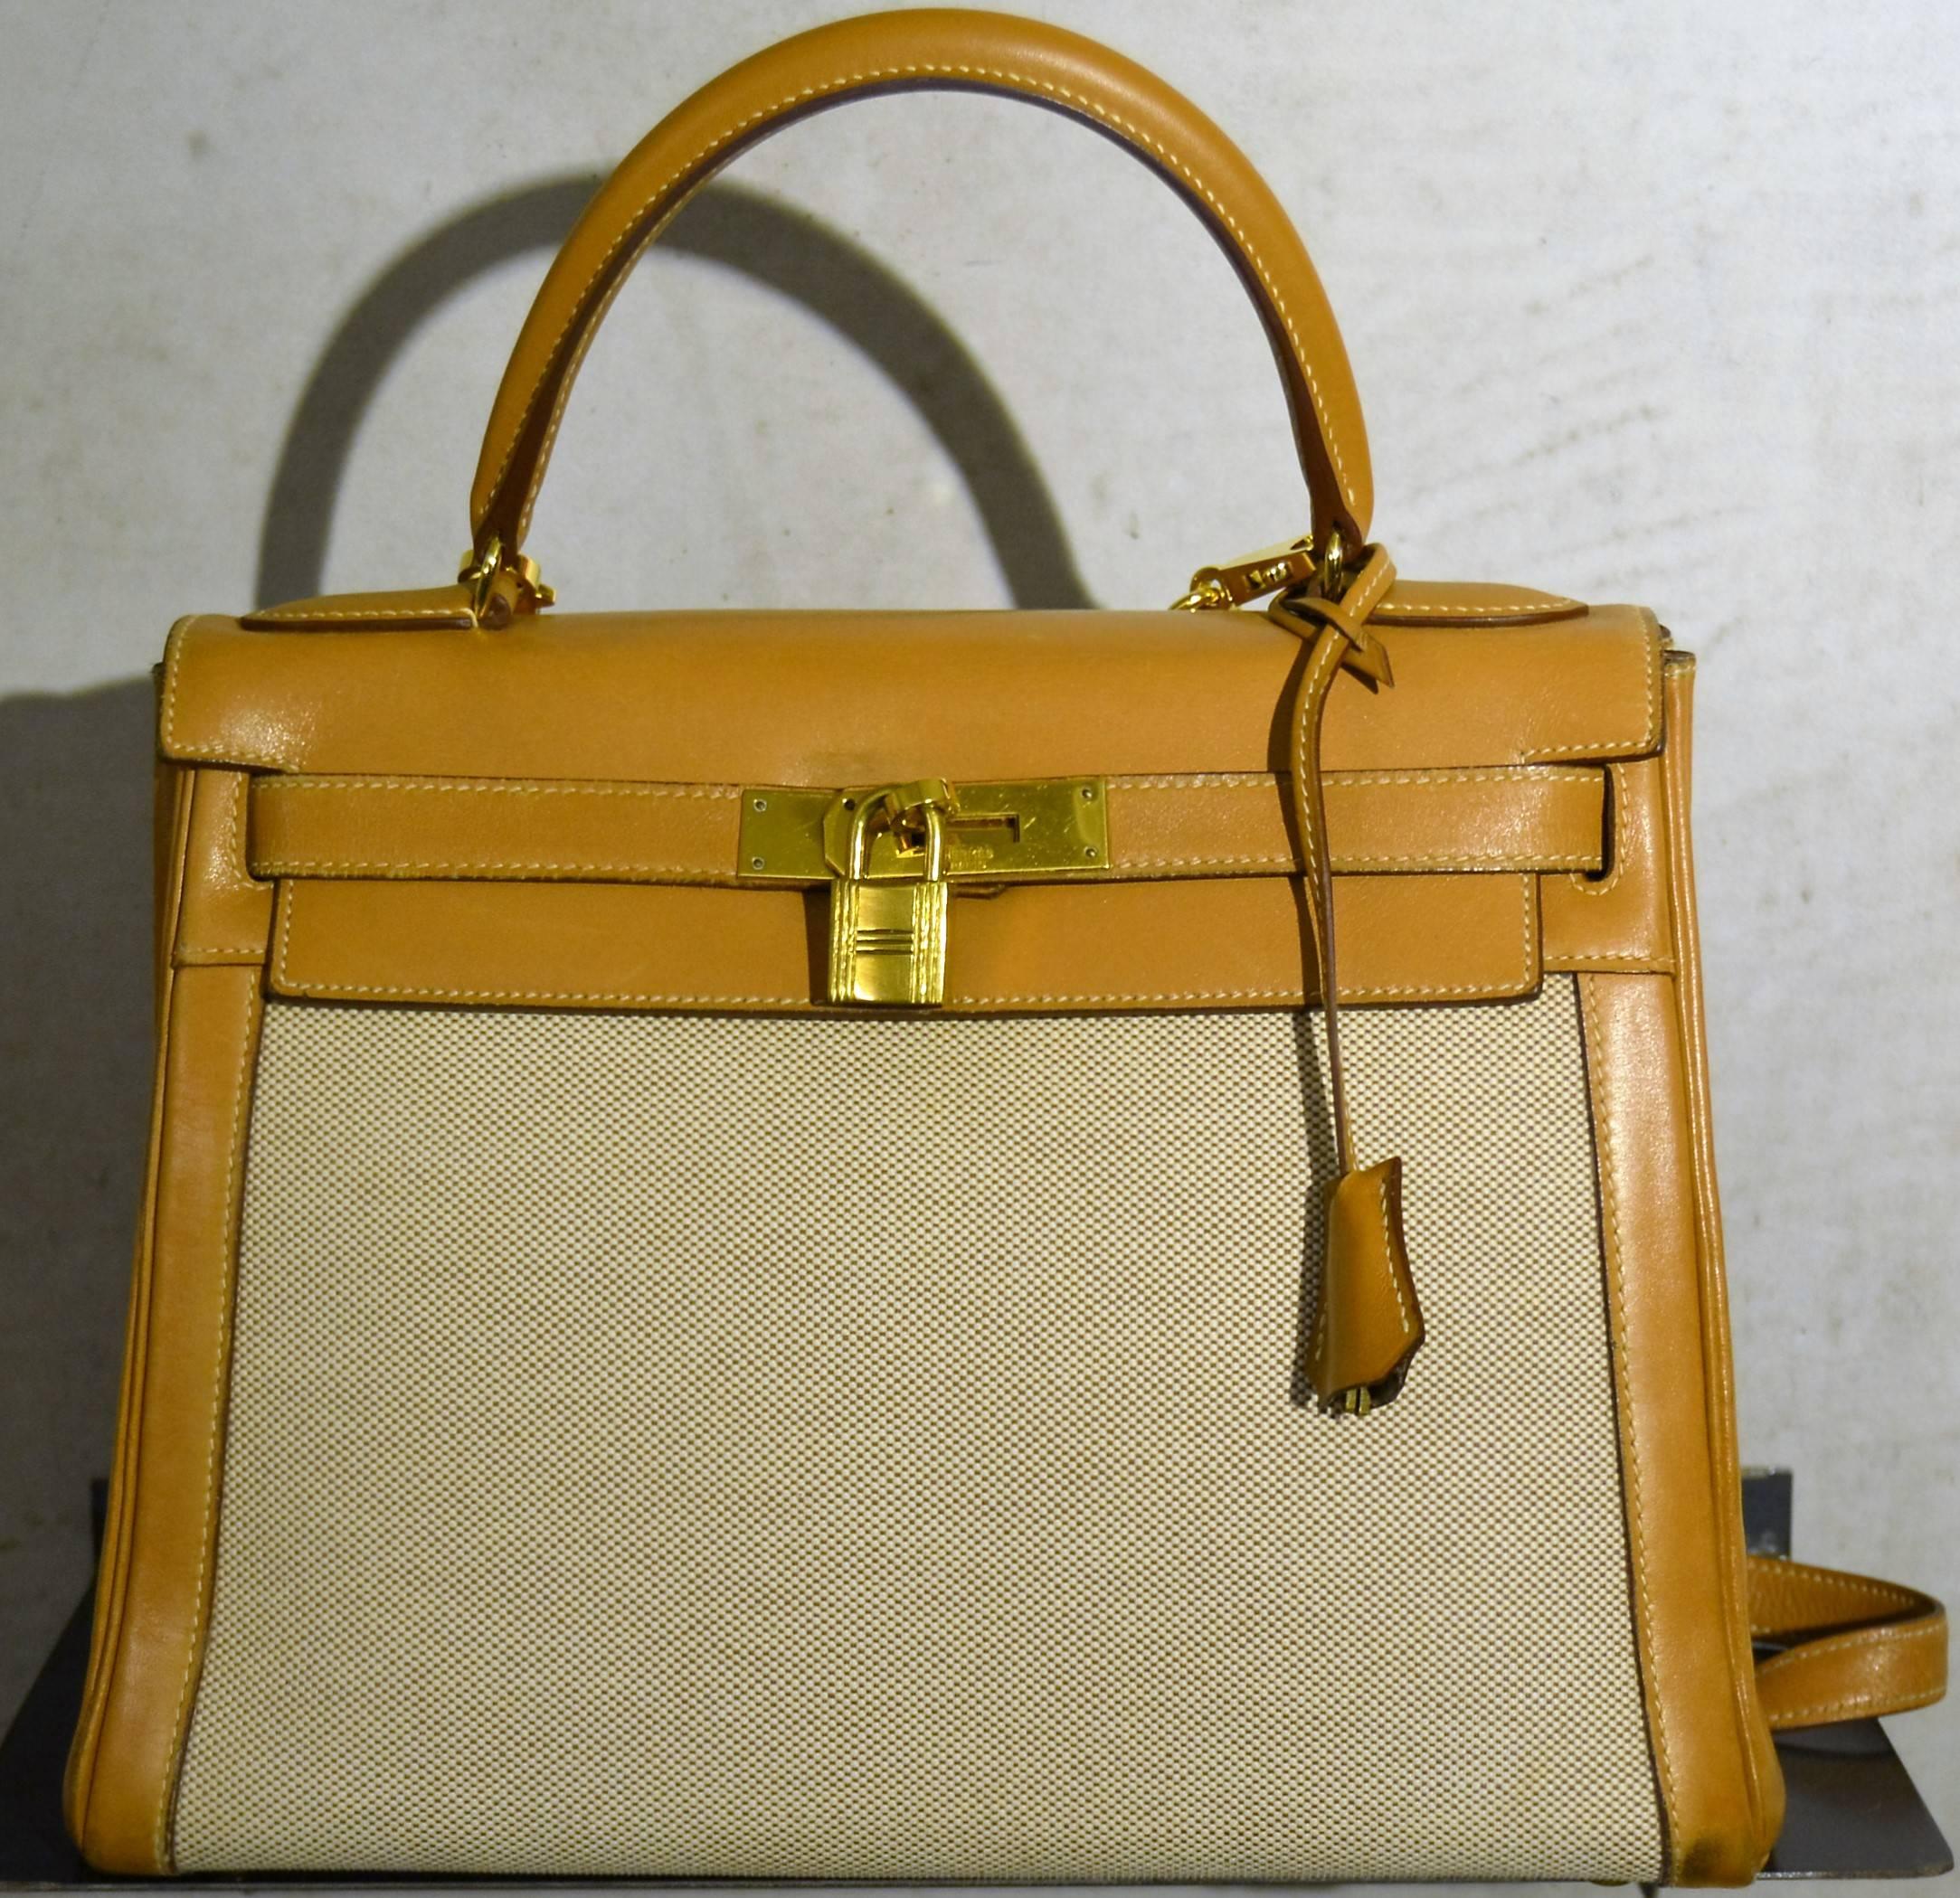 1990s Hermes Kelly 28 cm nude bag

please see carefully pictures